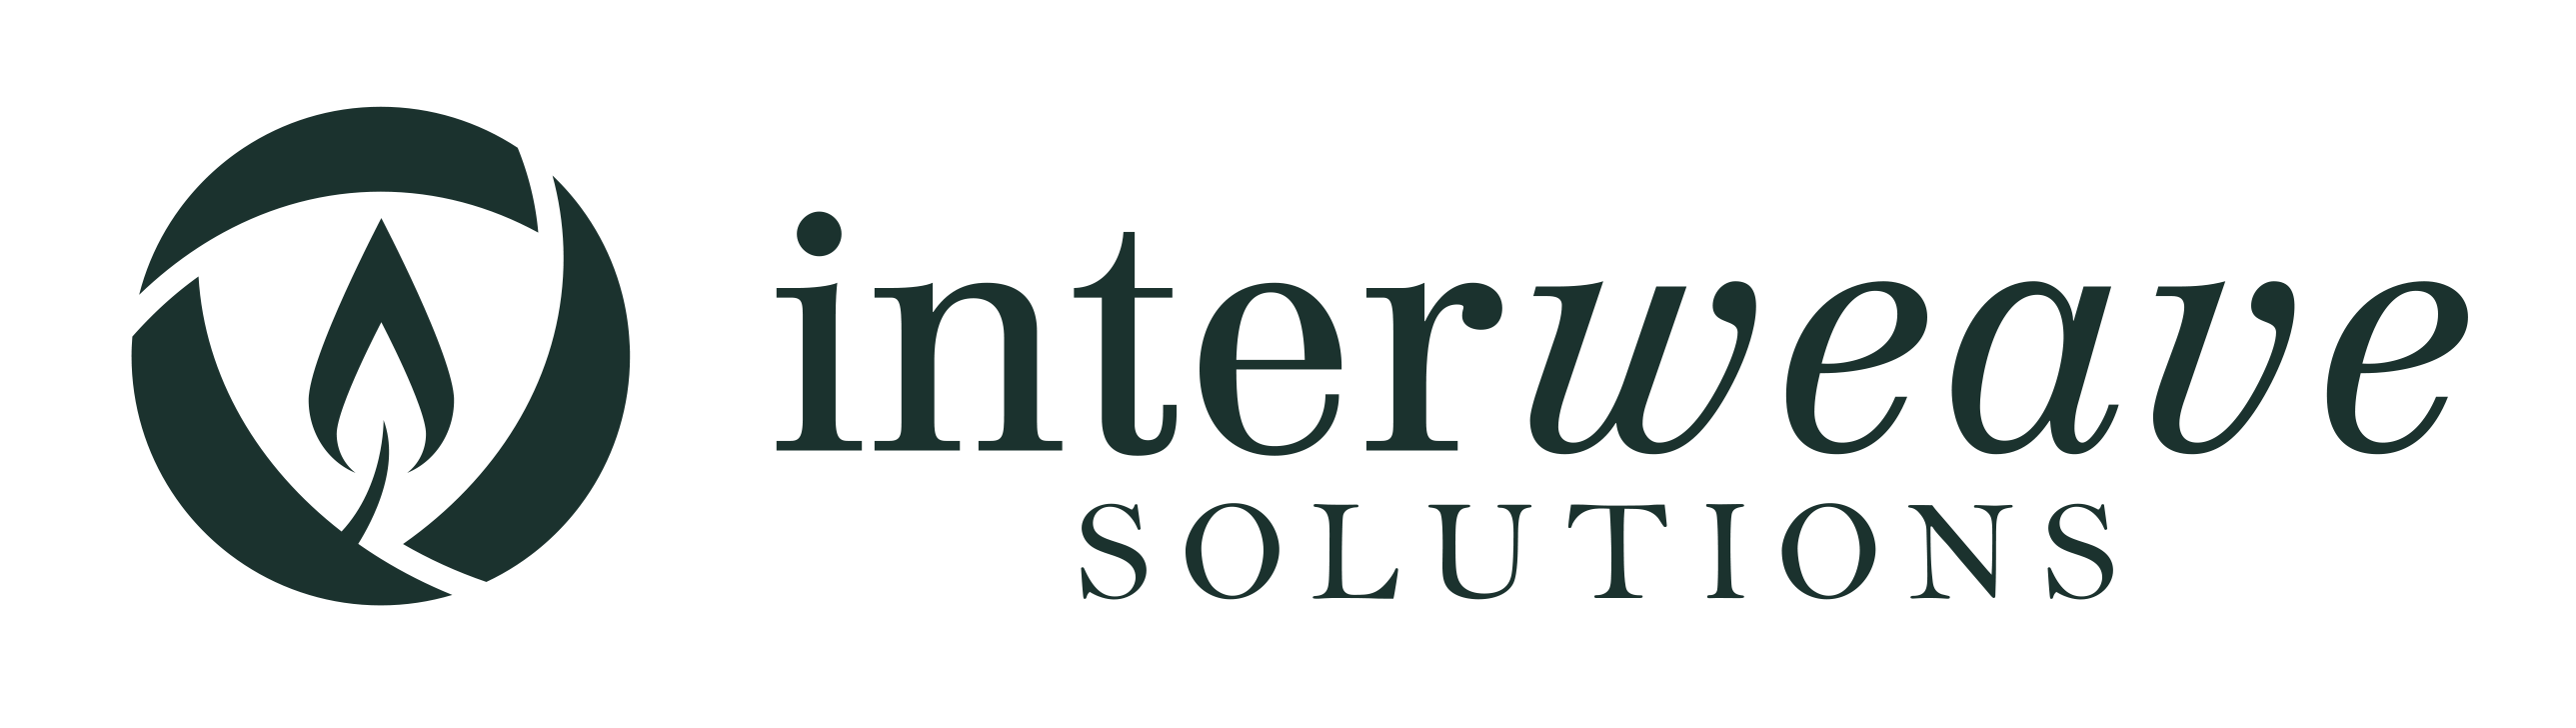 Download (1.5MB) Interweave Solutions logo, horizontal style, dark green color, in the Adobe Illustrator format (.ai)